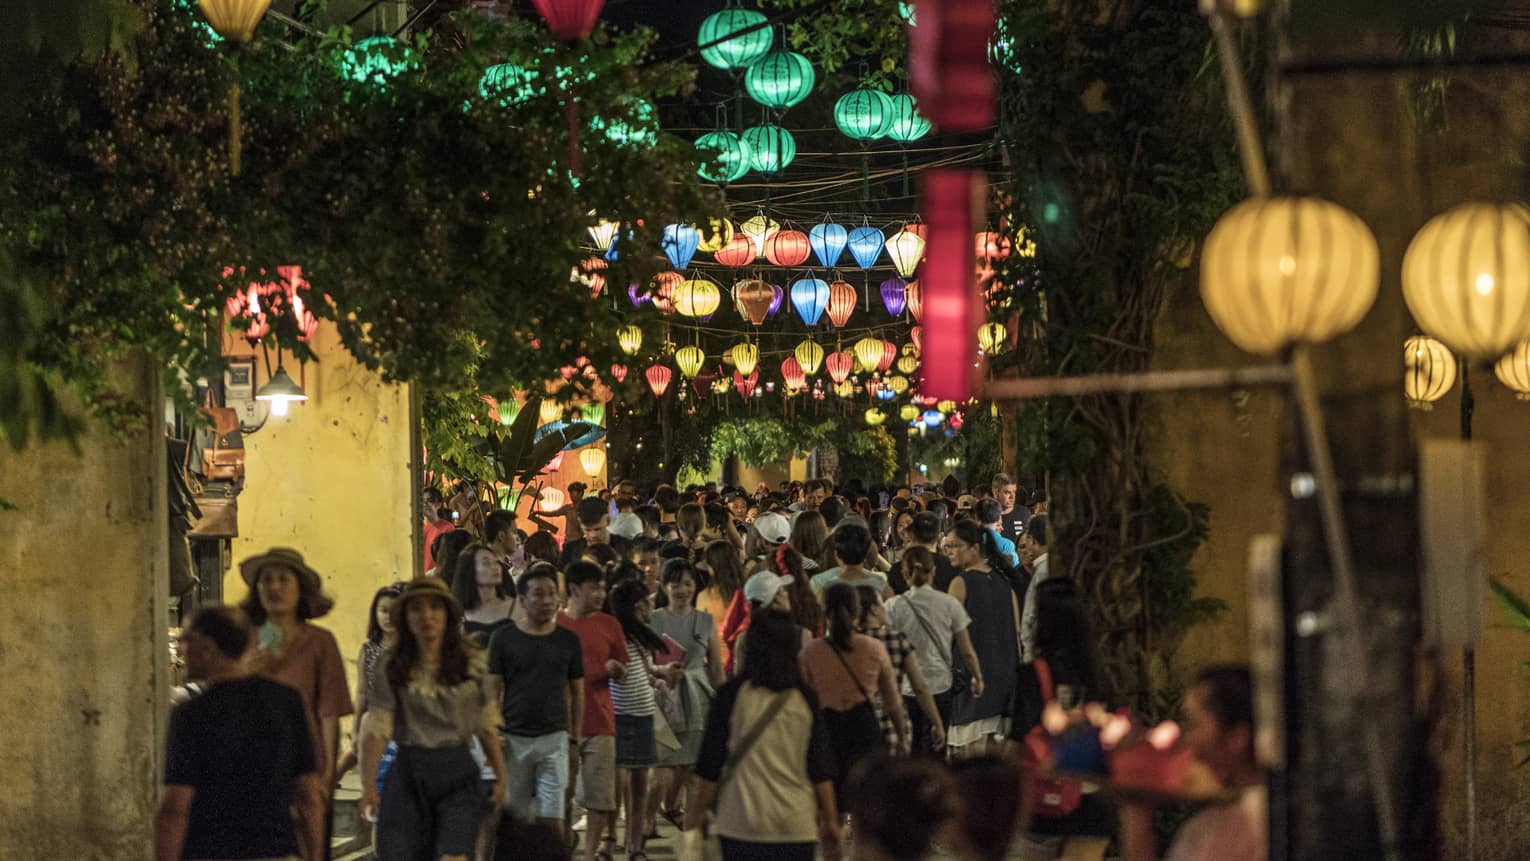 A nighttime view of a crowded street at night, lit with colorful lanterns in Hoi, Viet Nam